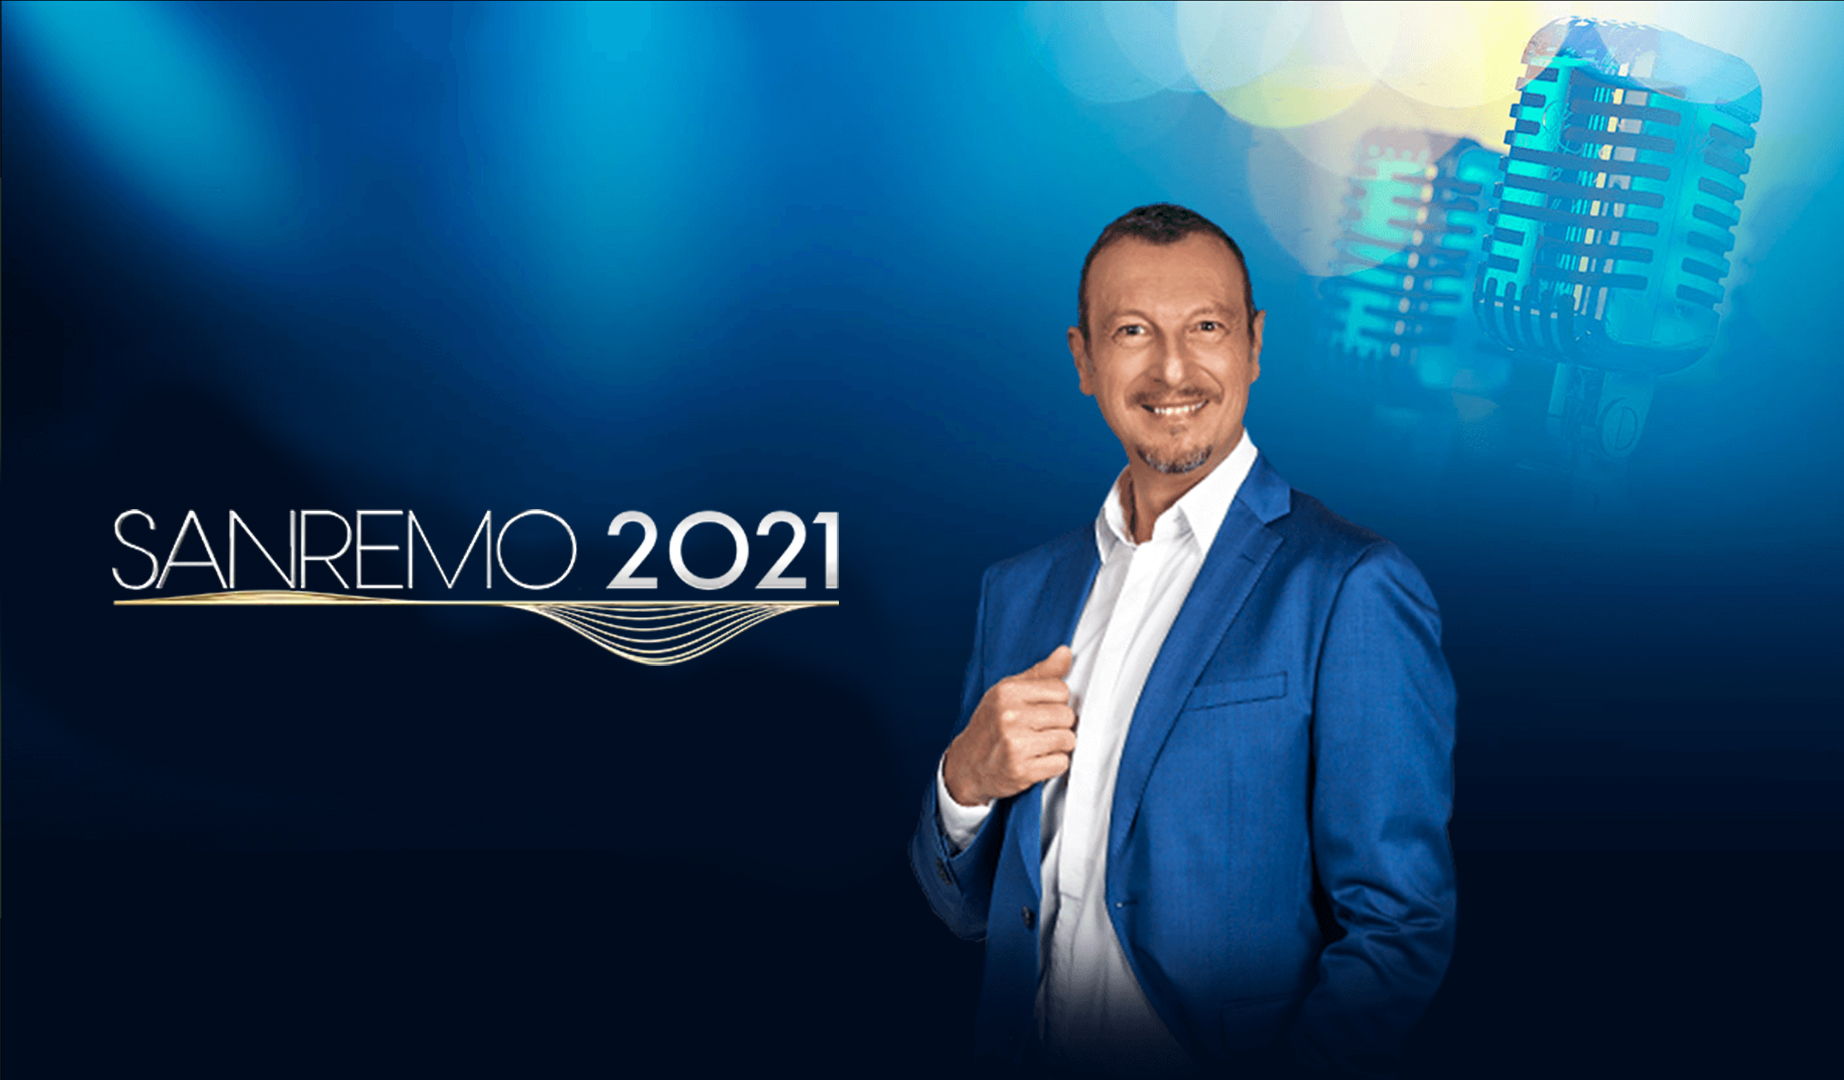 Italy: Meet the participants of Sanremo 2021